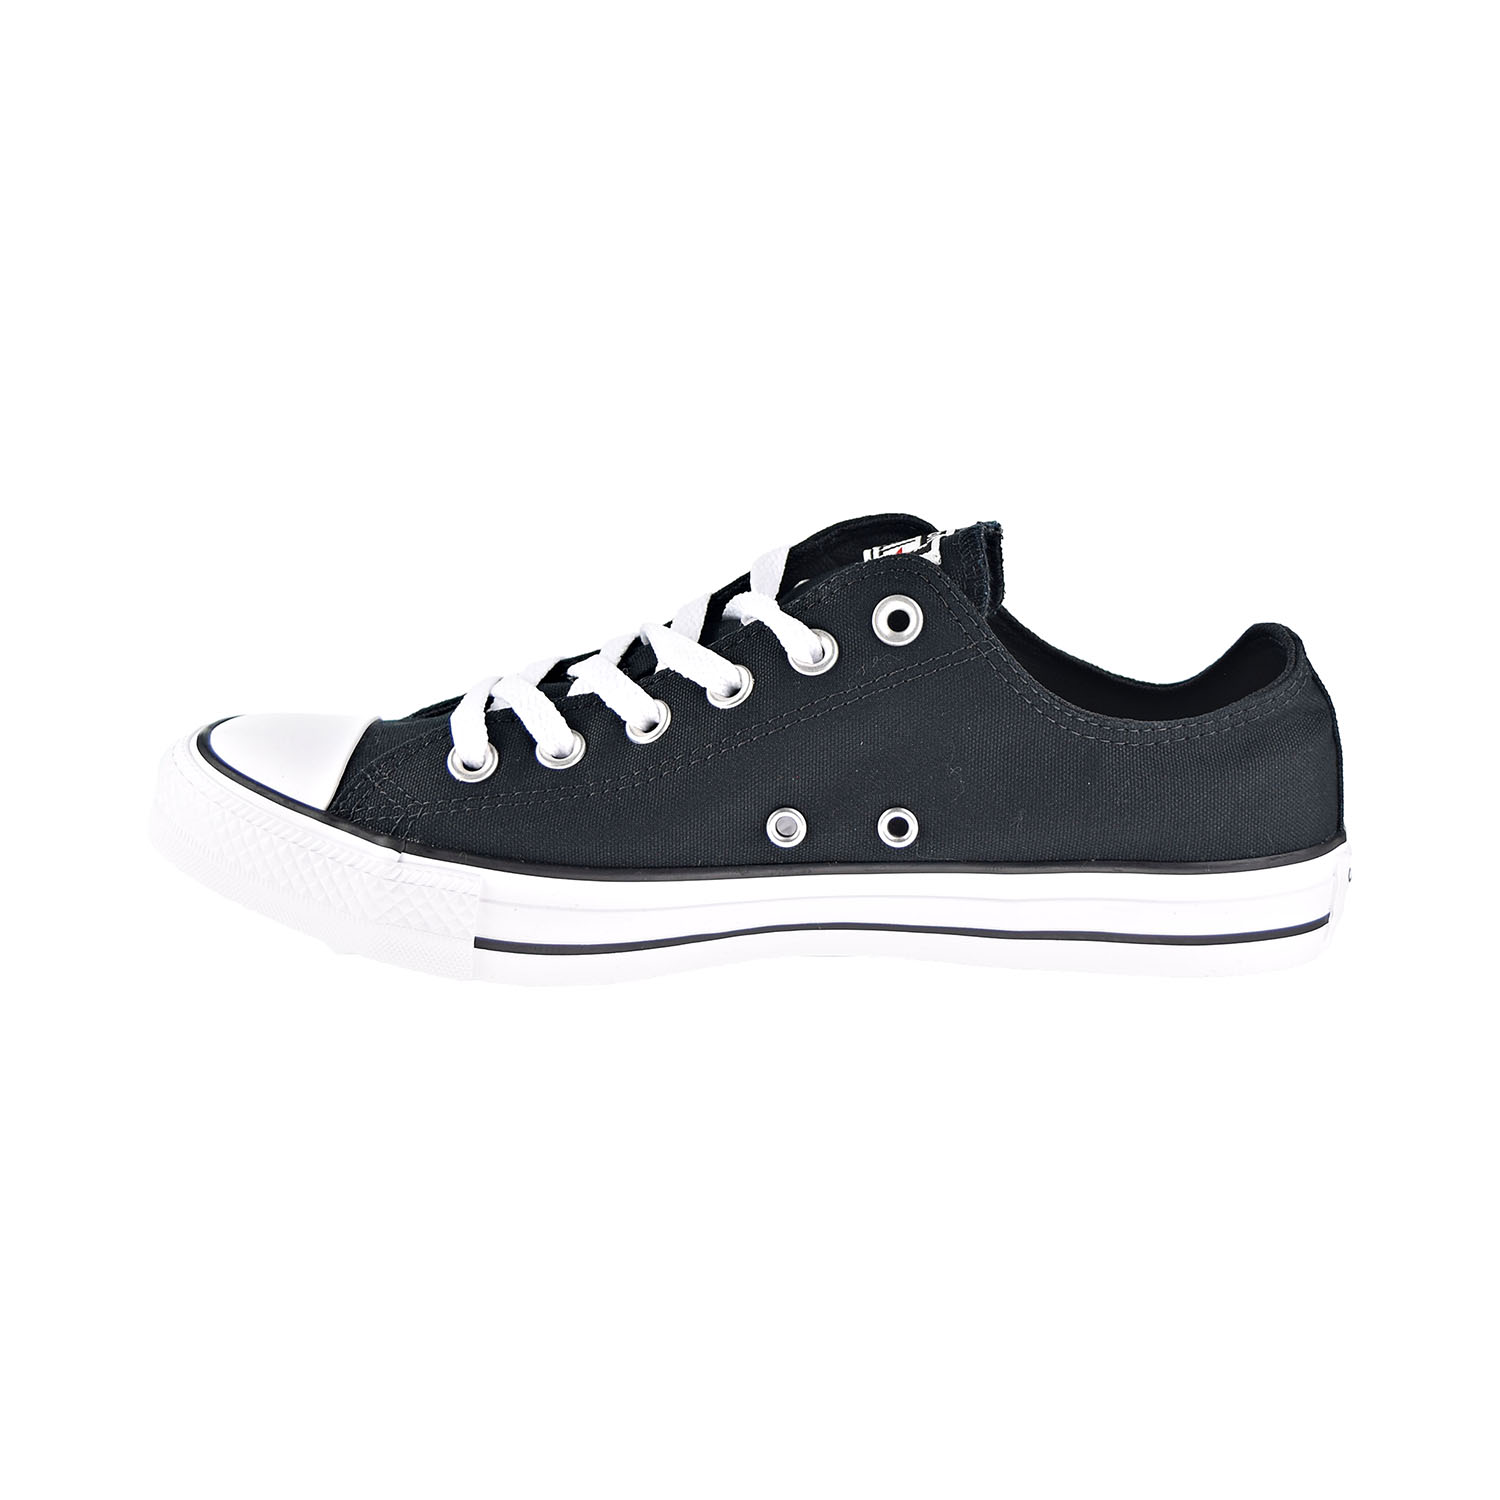 Converse Chuck Taylor All Star Ox Wordmark Men's Shoes Black-Enamel Red-White 165430f - image 4 of 6